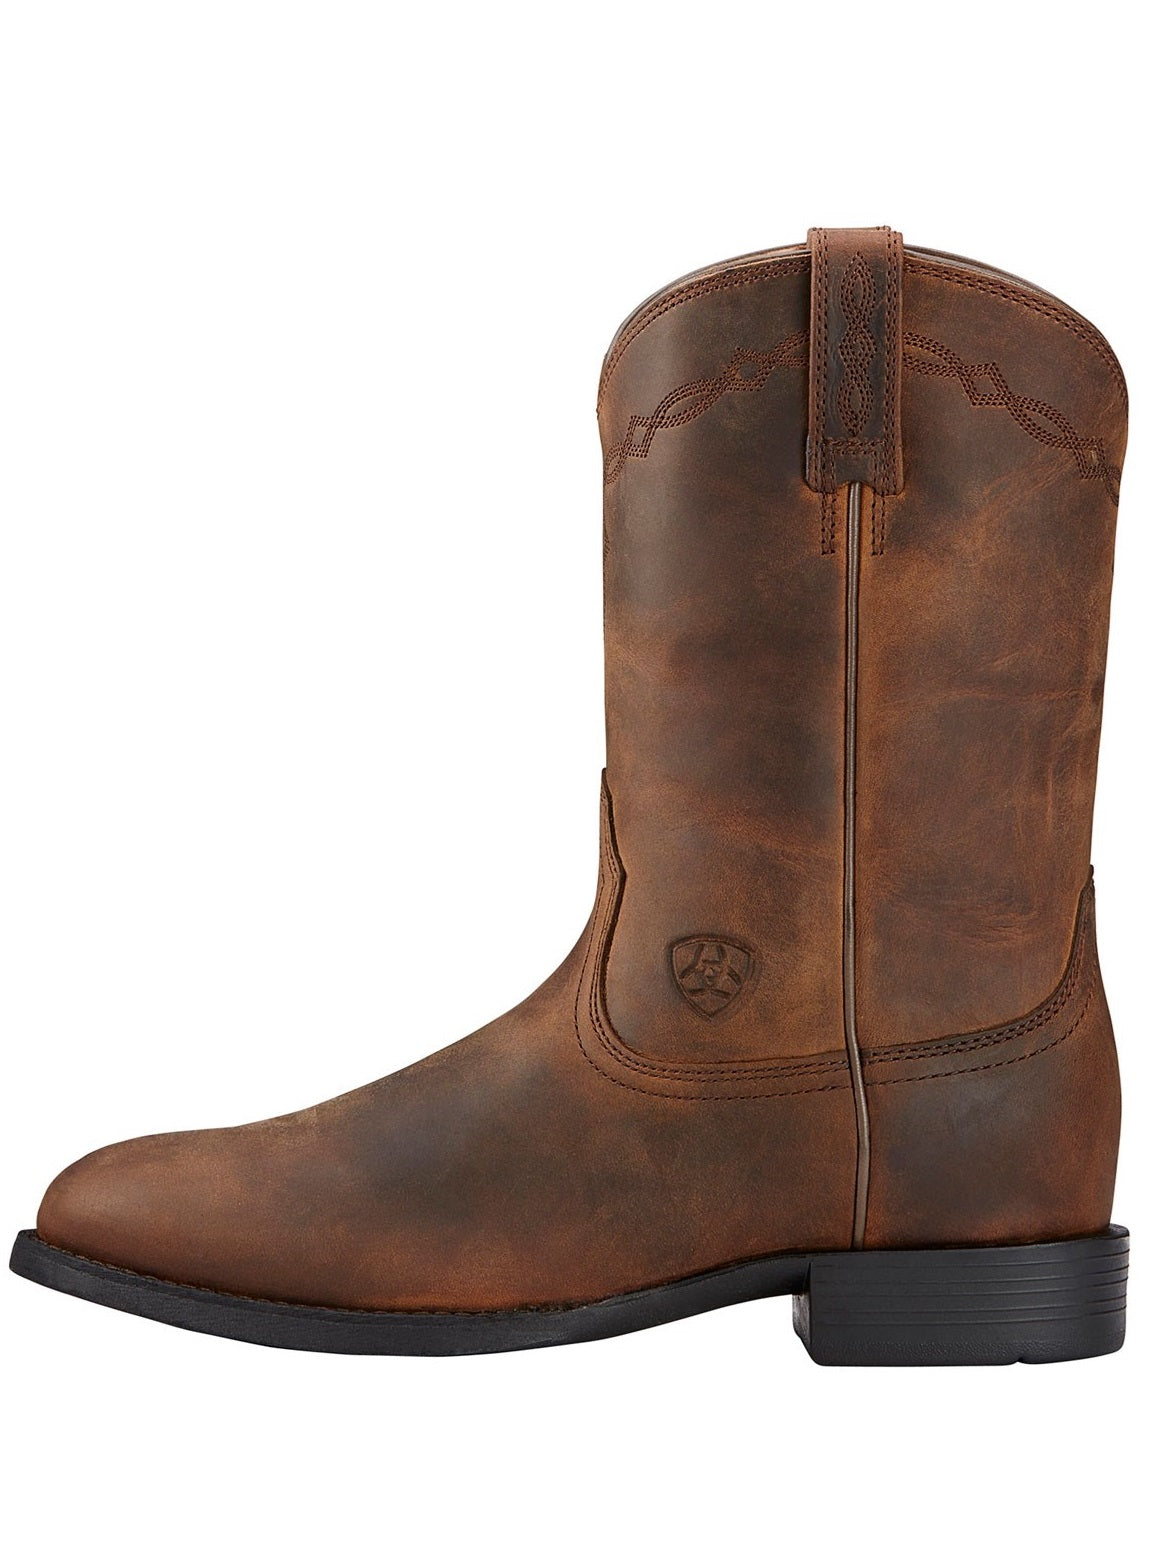 ARIAT Heritage Roper Boots - Womens Western - Distressed Brown